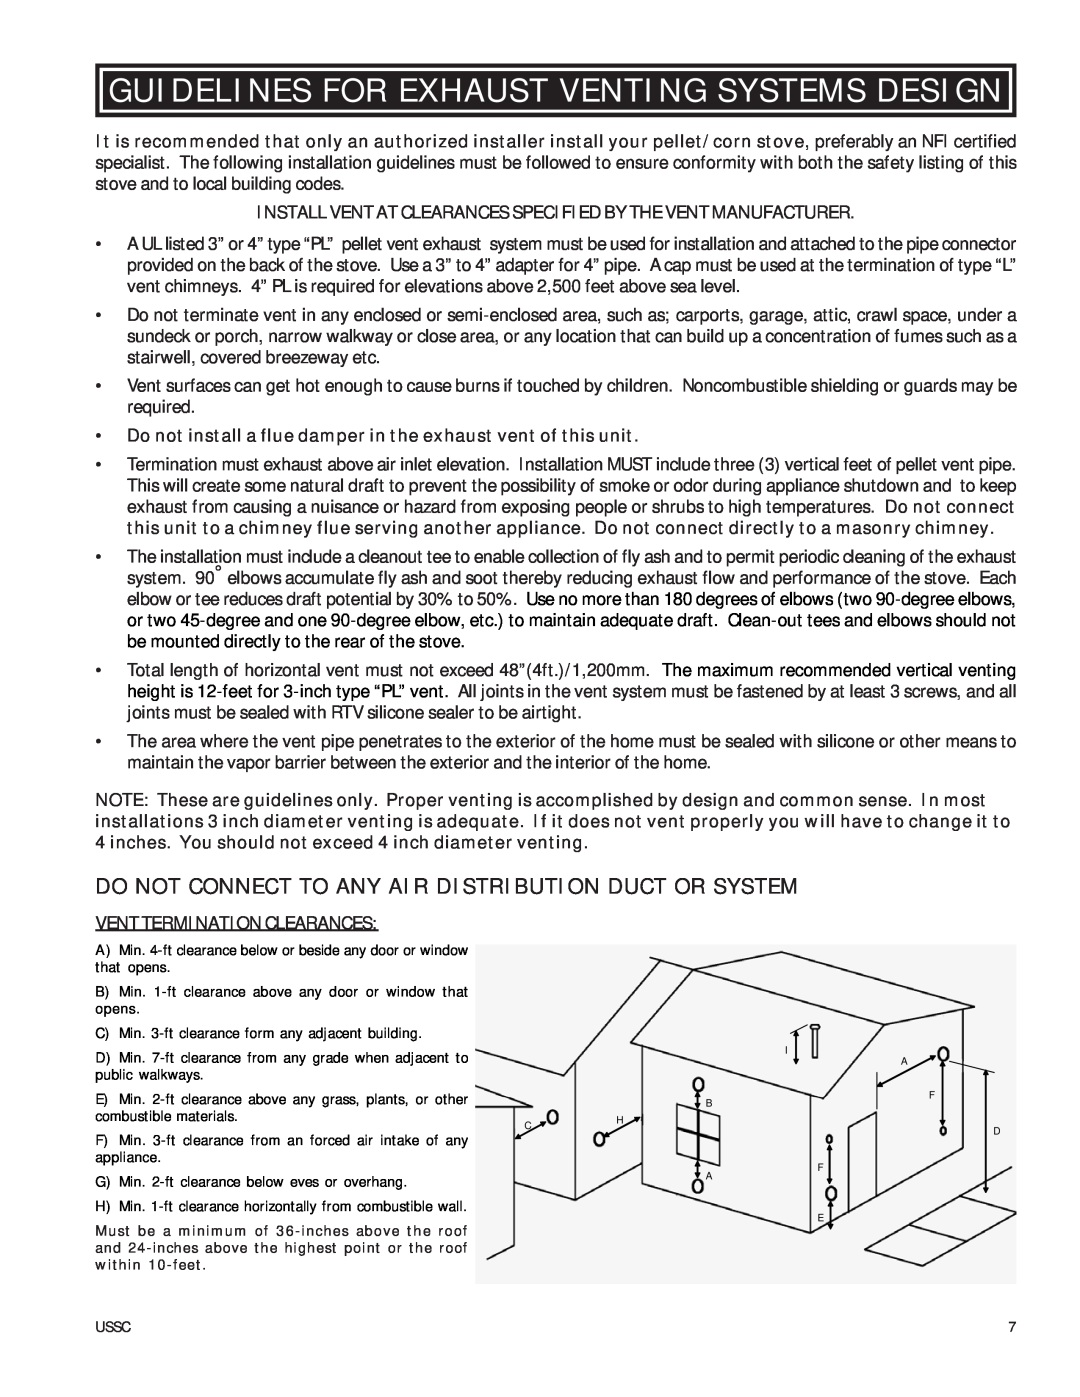 United States Stove 6039HF owner manual Guidelines For Exhaust Venting Systems Design, Ventterminationclearances 